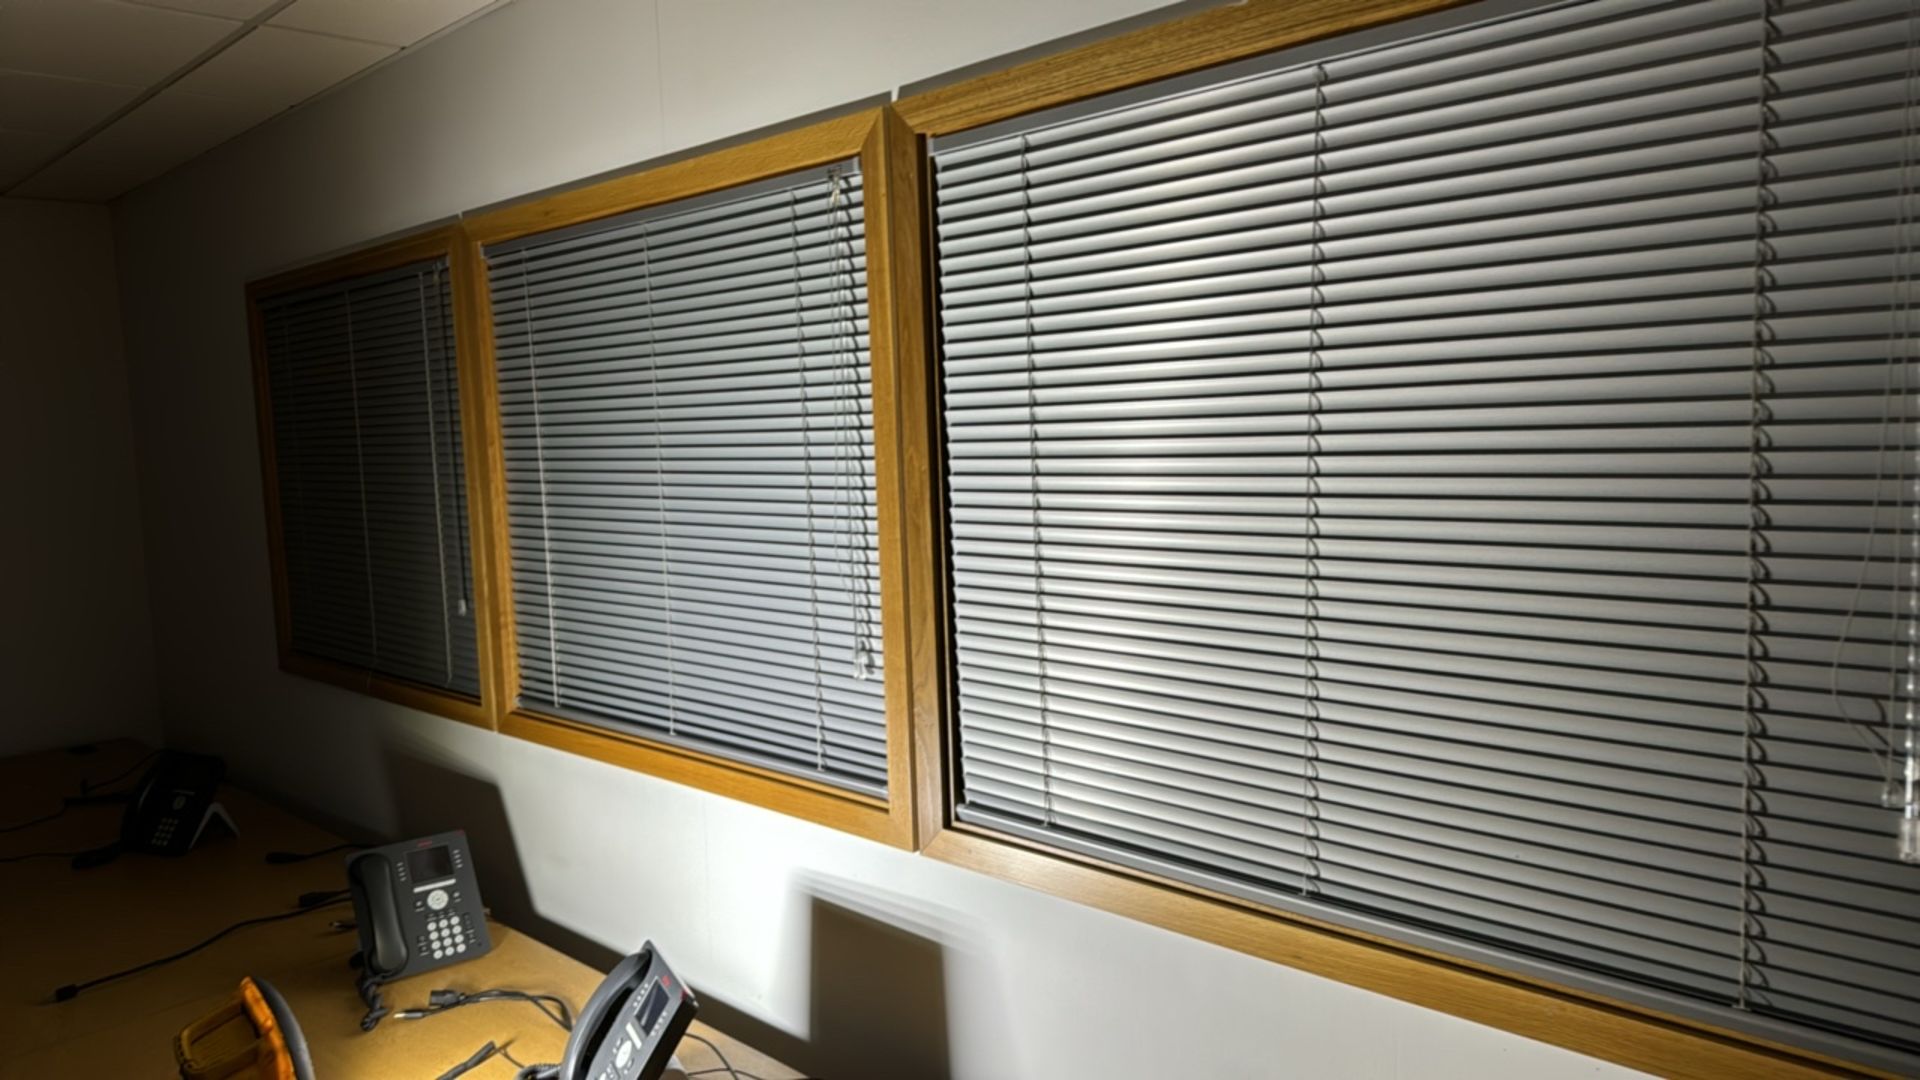 Window Blinds x12 - Image 2 of 4